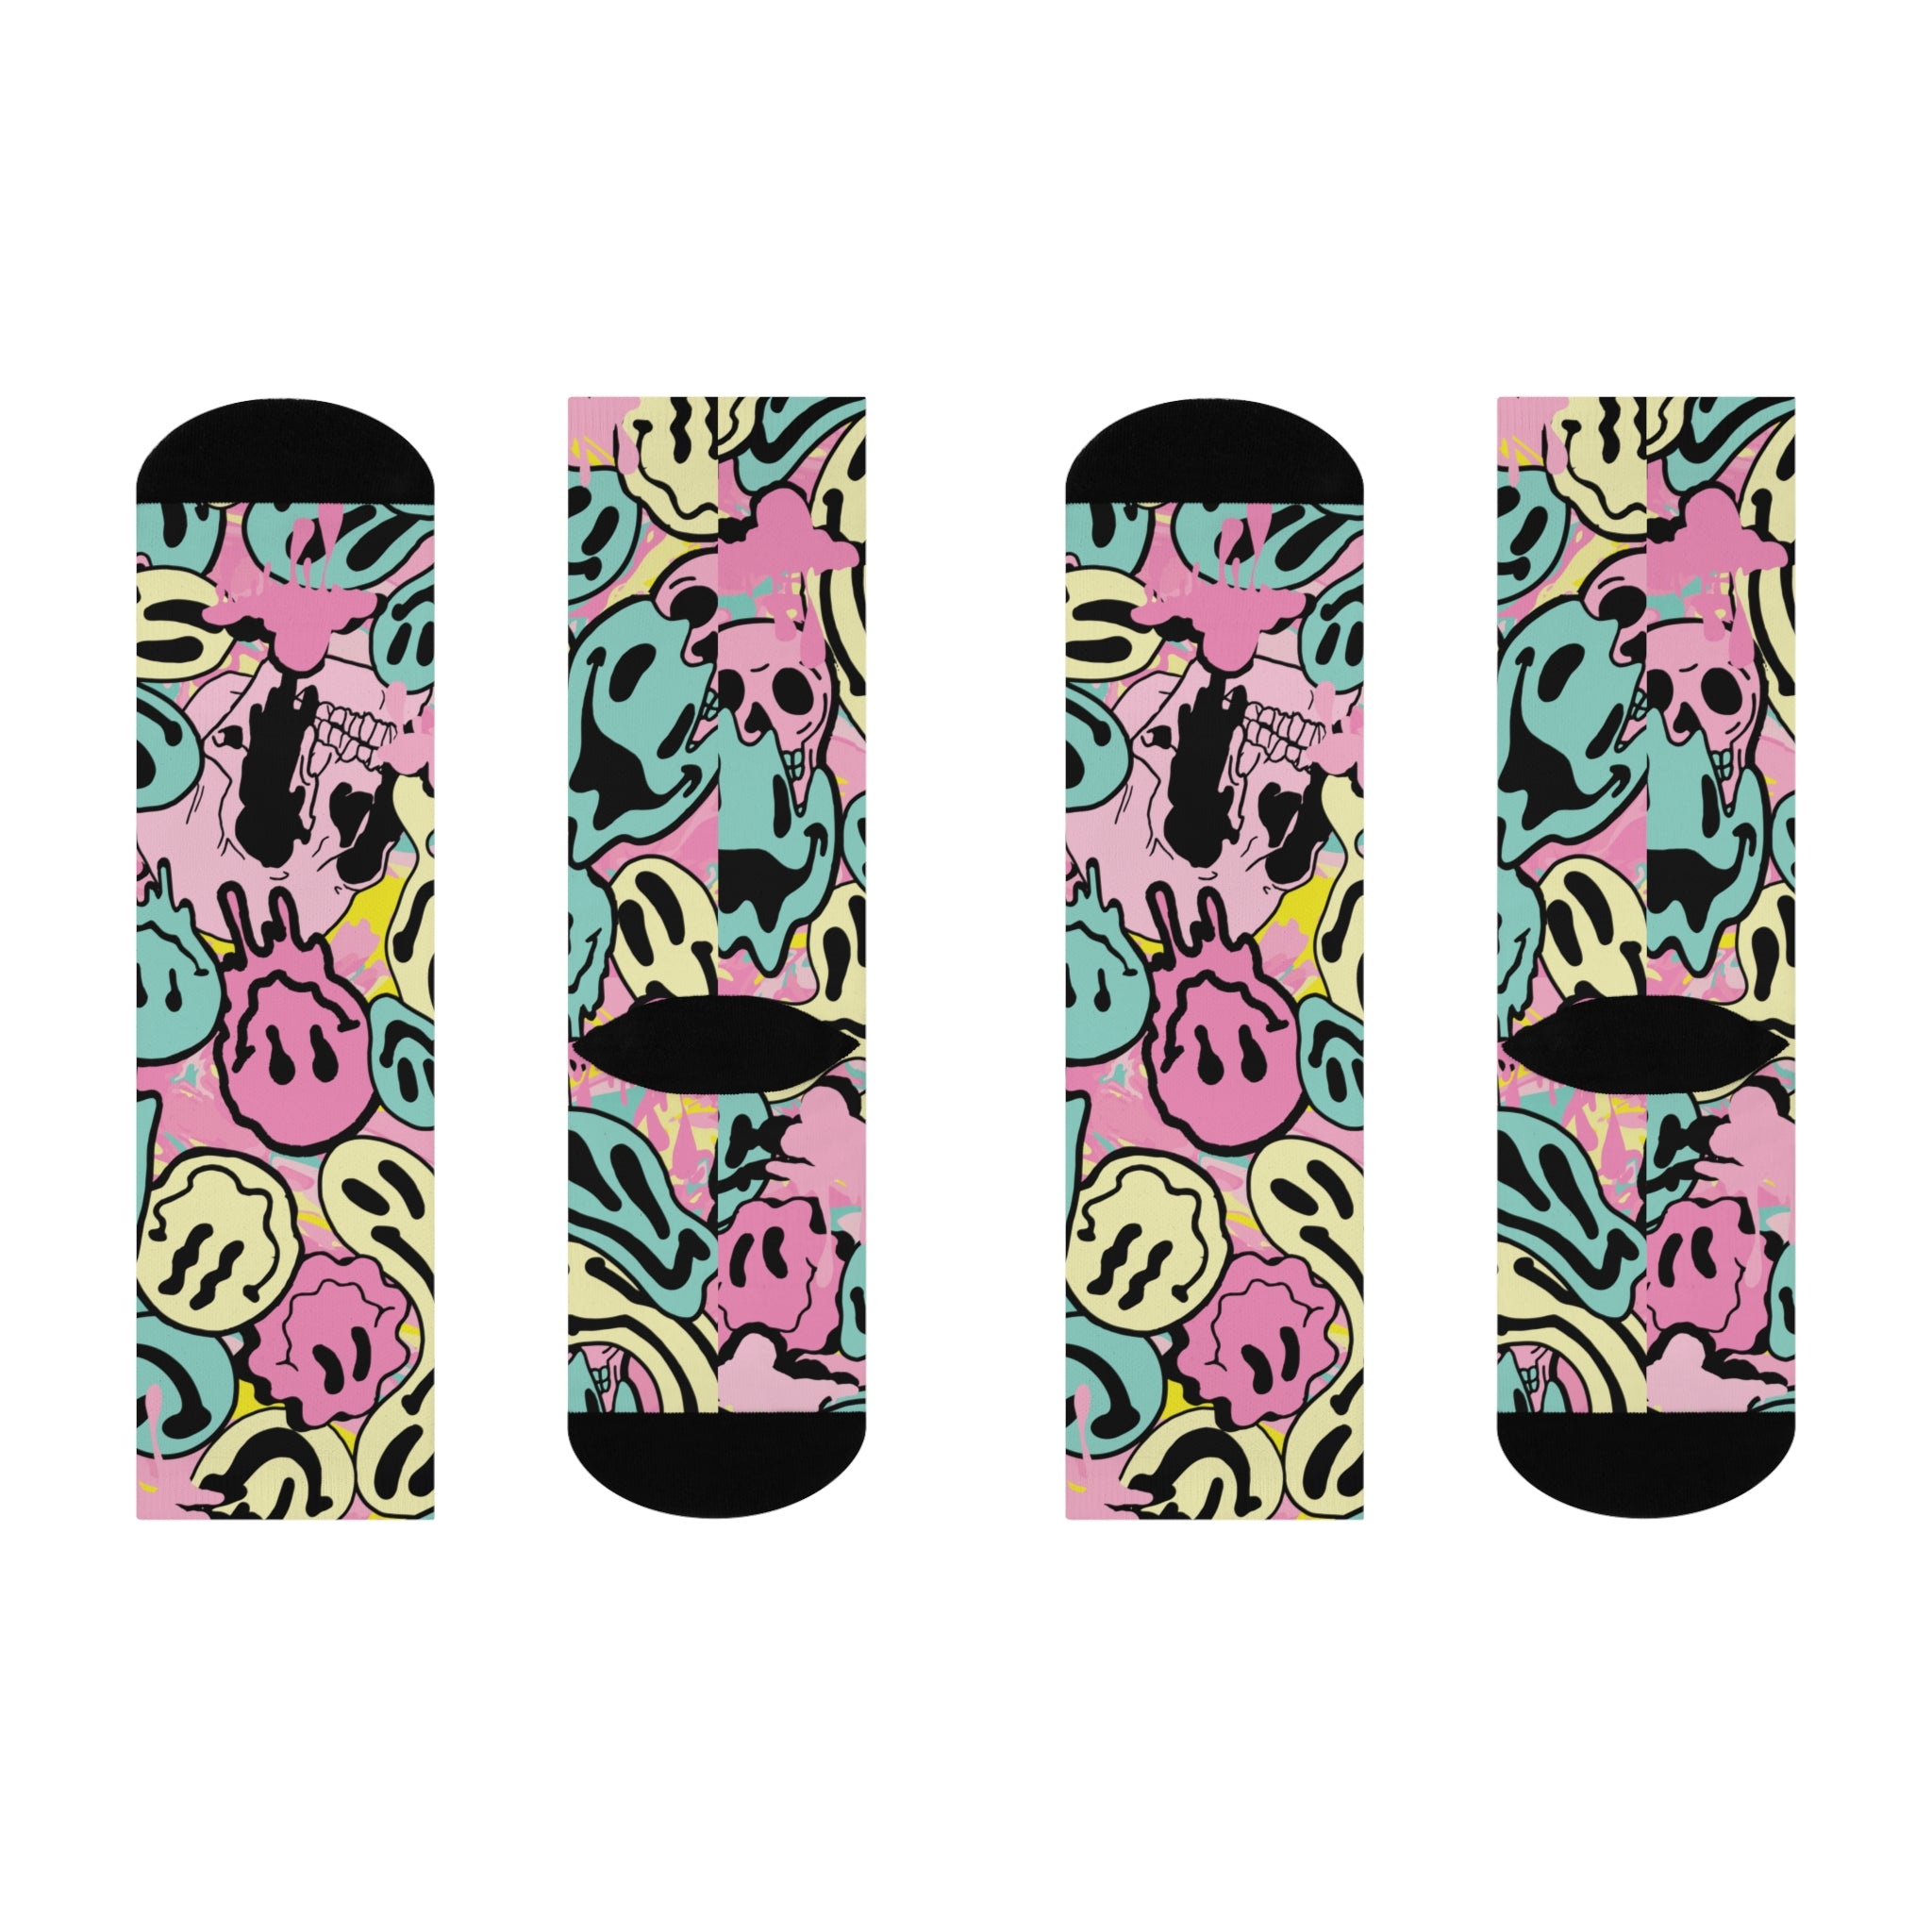 Fun and vibrant socks adorned with a 90s-inspired design of melting smiley faces in various colors, with black heels and toes, perfect for those who love retro and unique styles.